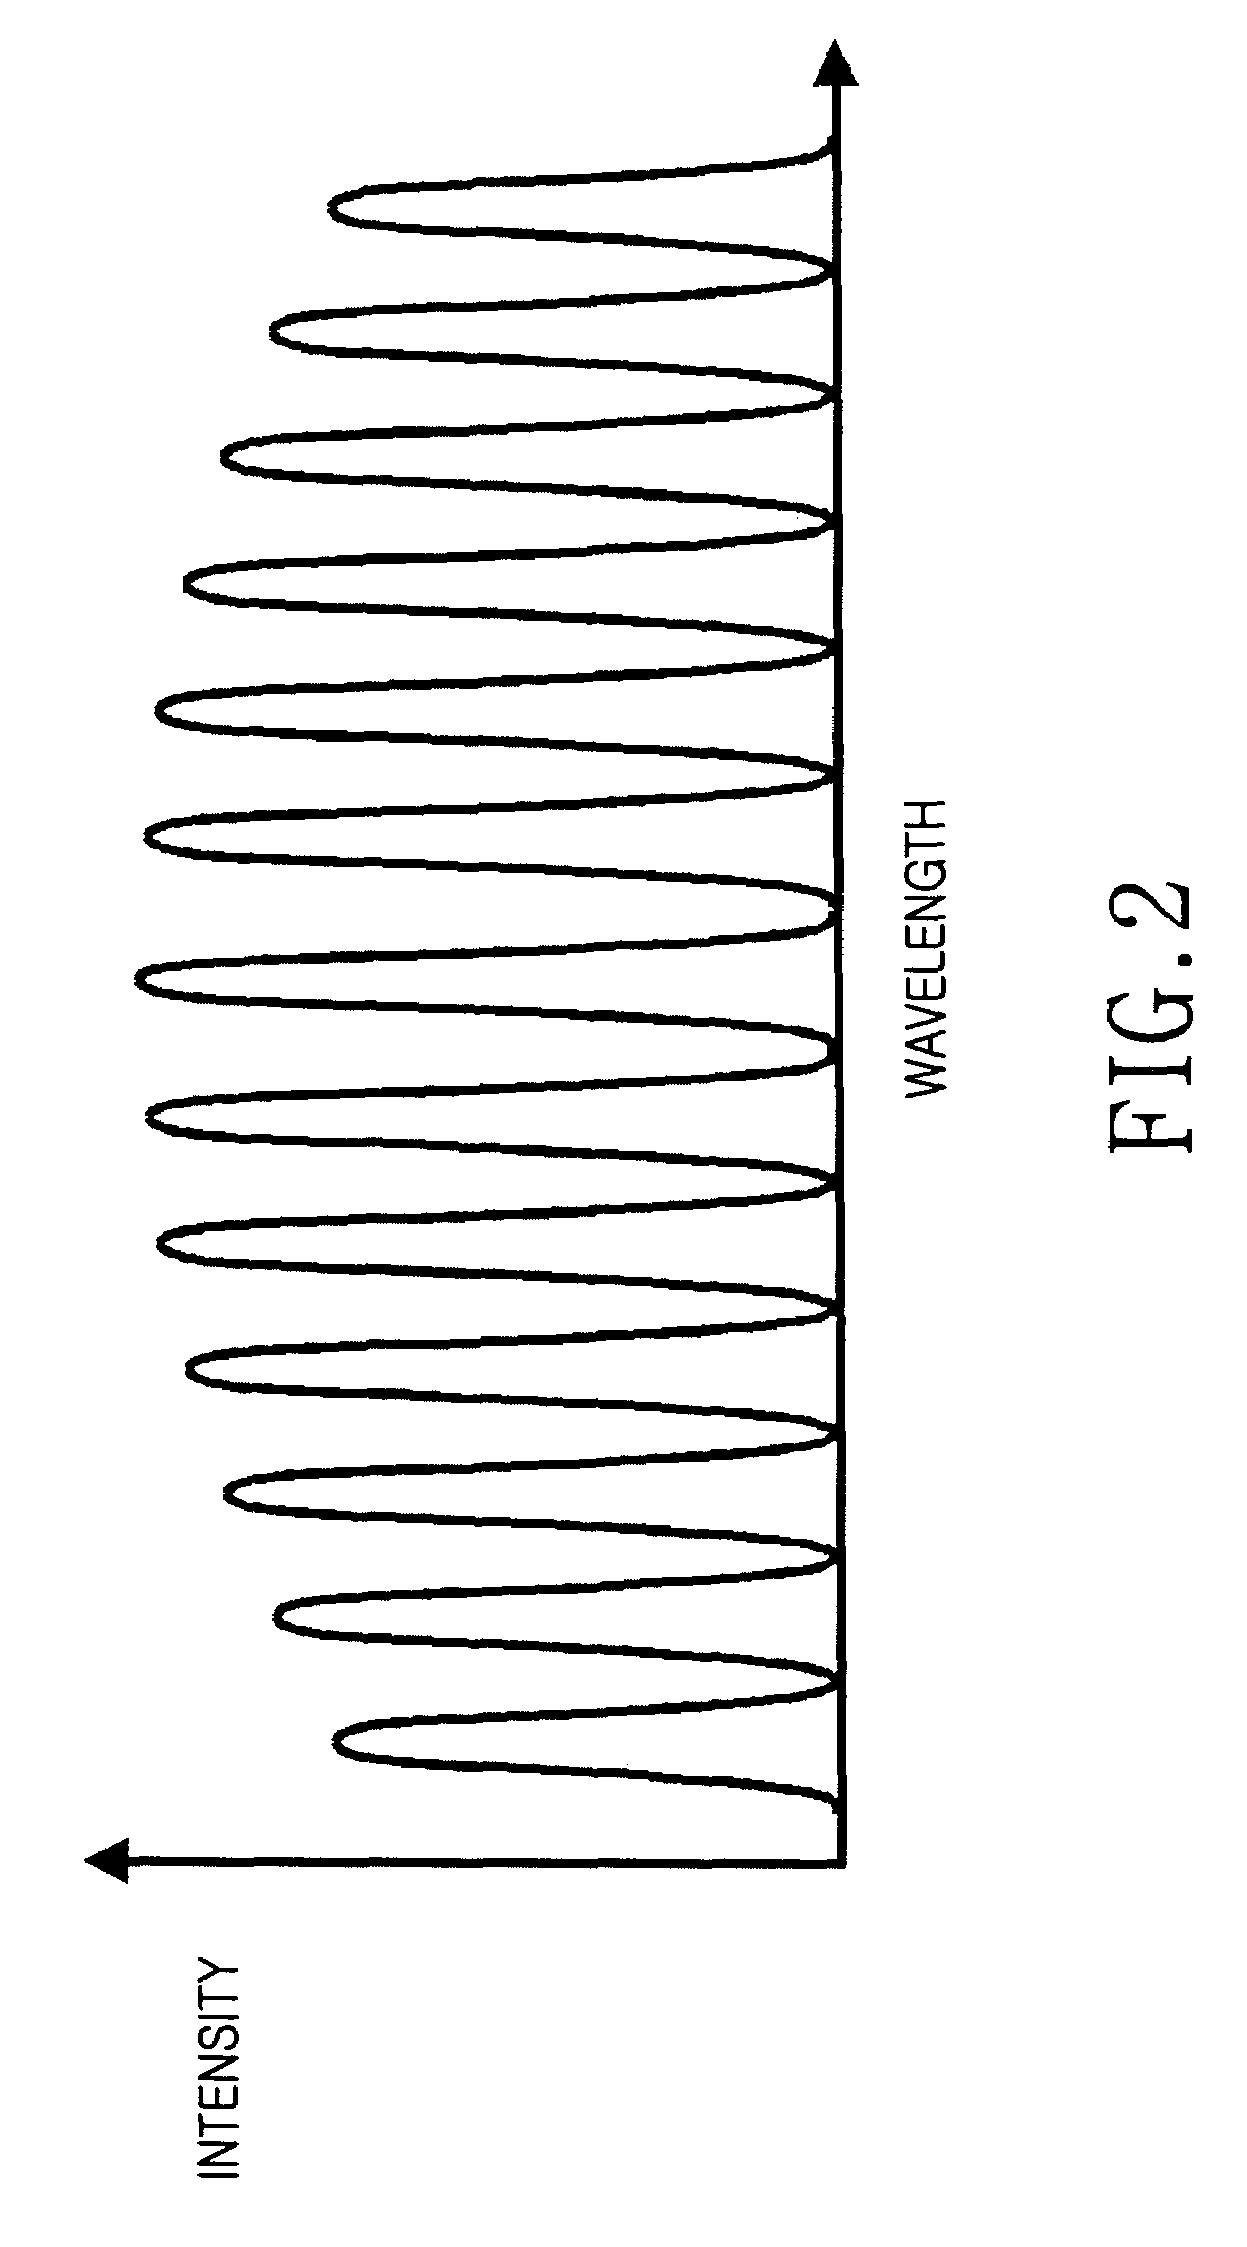 Self-seeded Fabry-Perot laser device for wavelength division multiplexing system